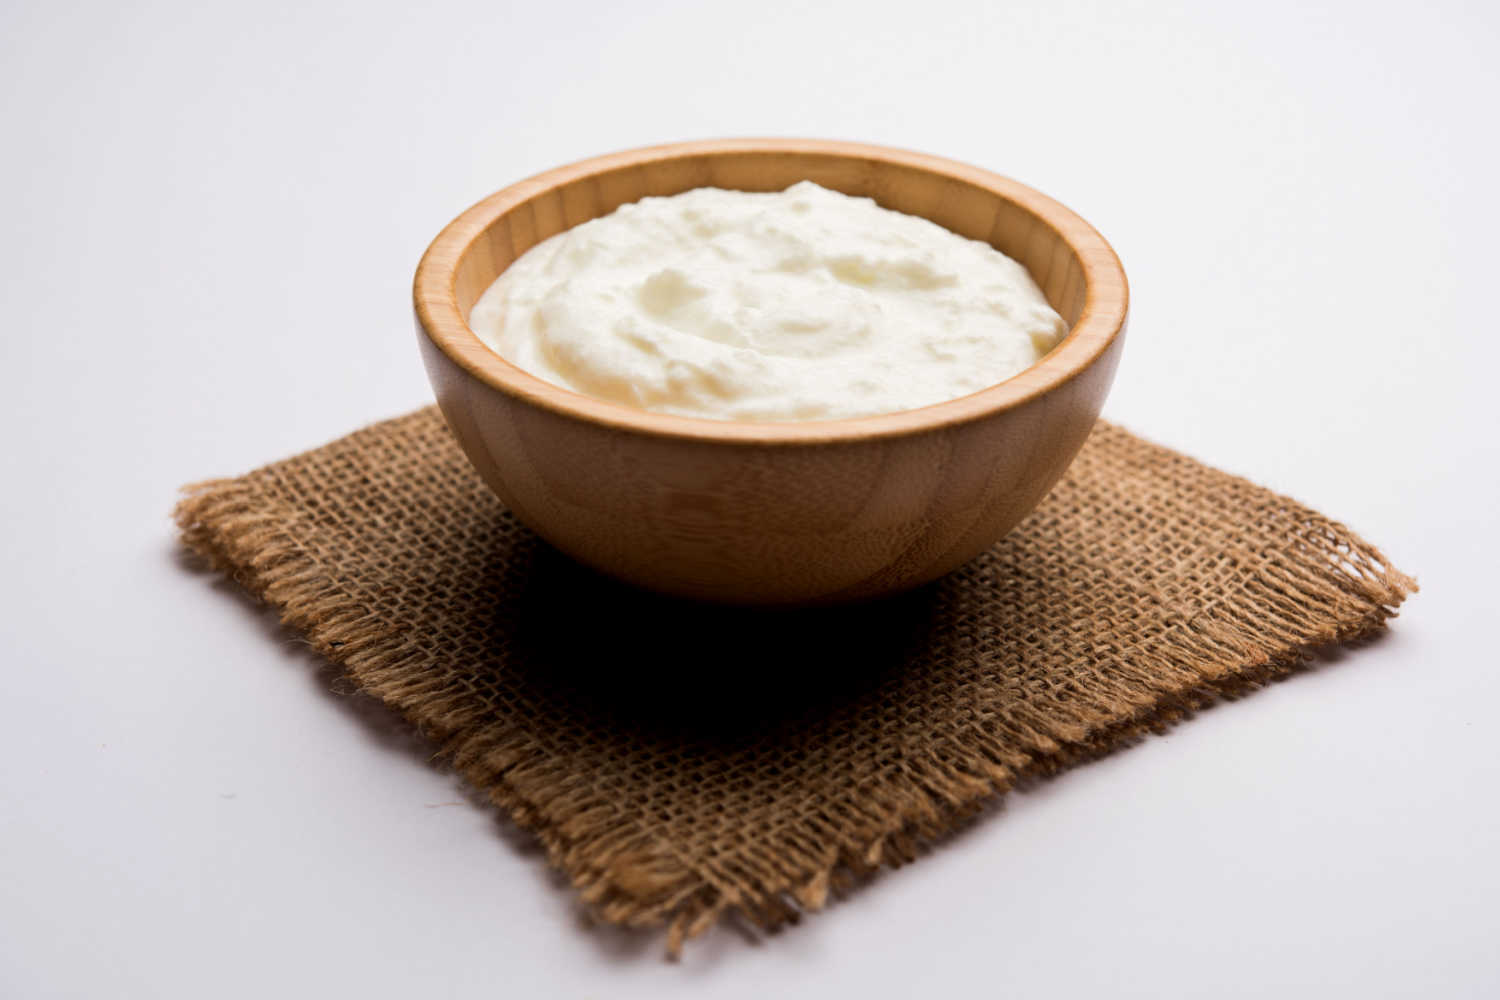 Curd can be used as home remedy for dandruff